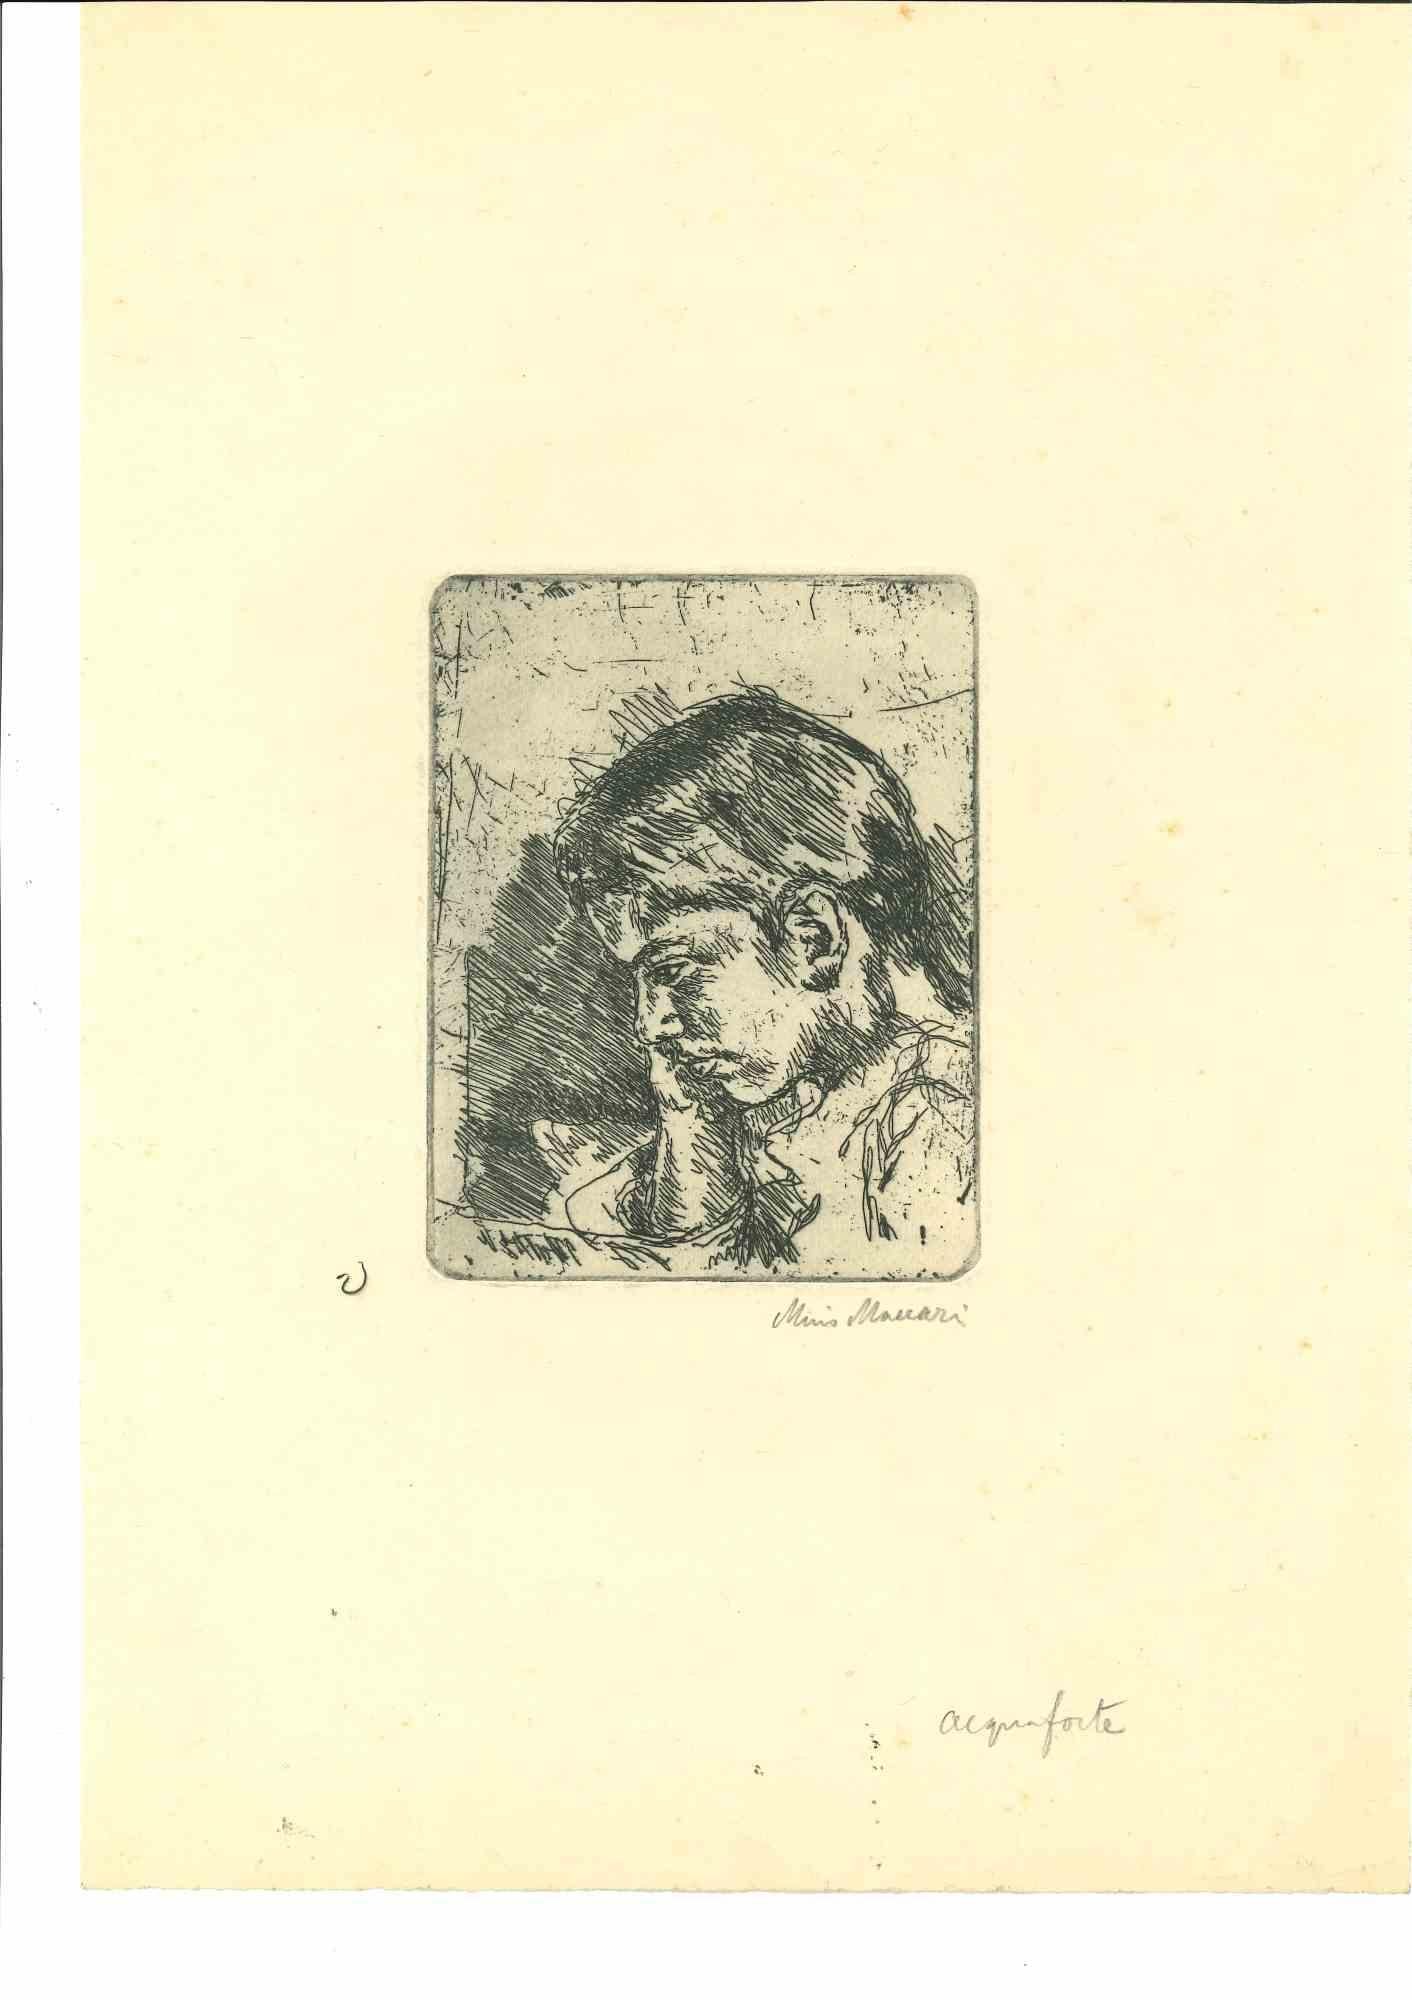 Portrait of Girl is an original Etching realized by Mino Maccari in mid-20th century.

Good condition on a yellowed paper.

Hand-signed by the artist with pencil.

Mino Maccari (1898-1989) was an Italian writer, painter, engraver and journalist,